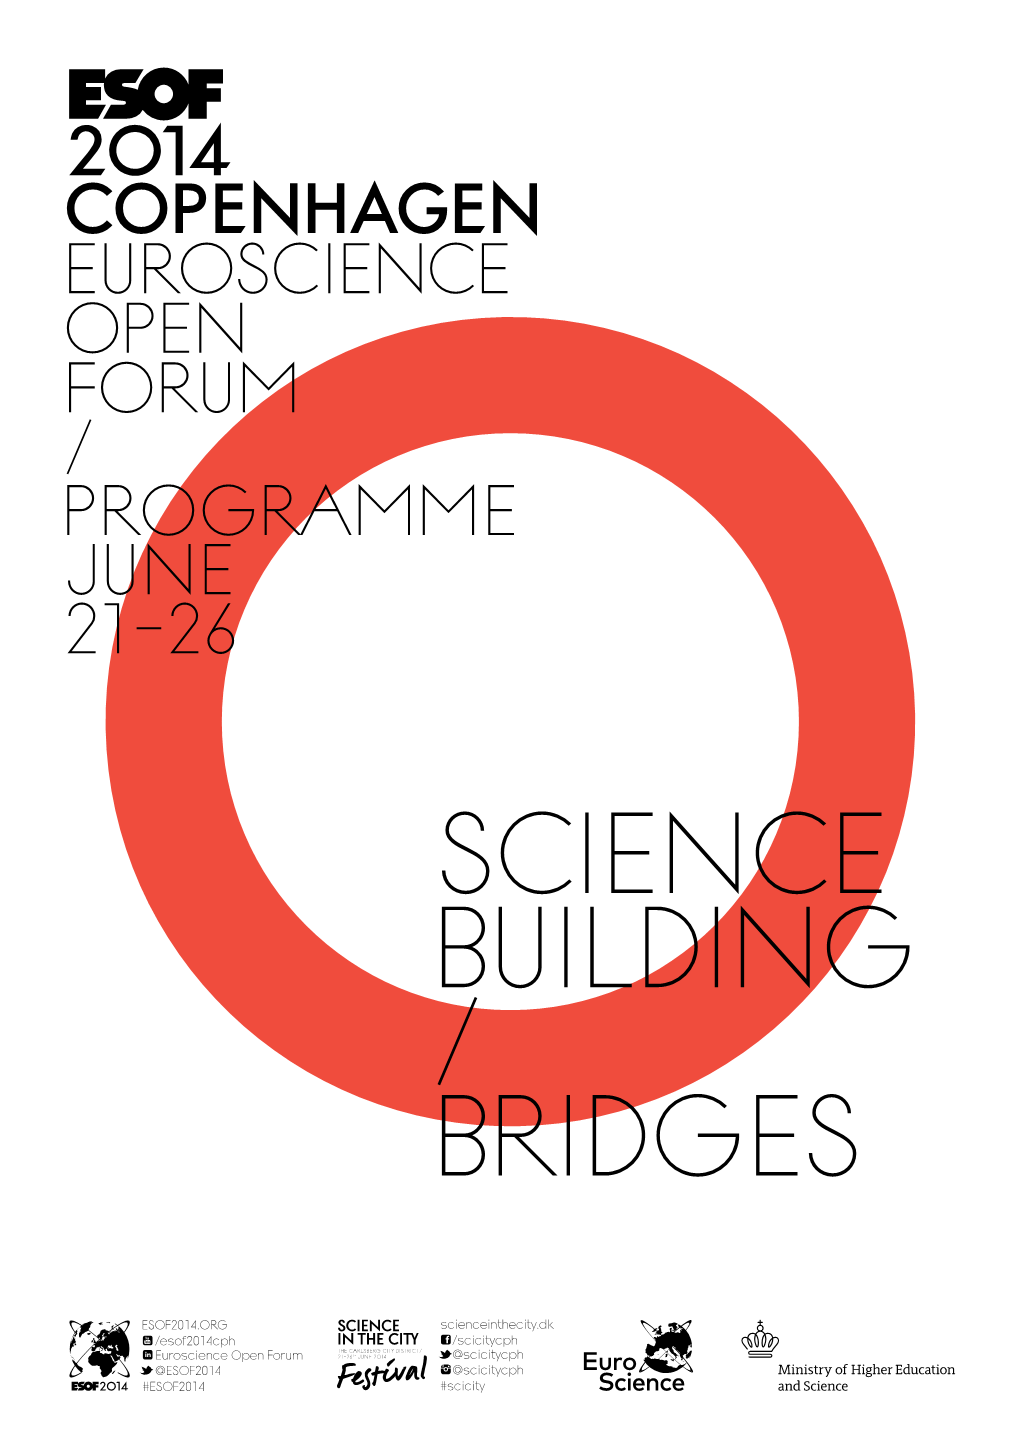 View the Esof 2014 Programme Book